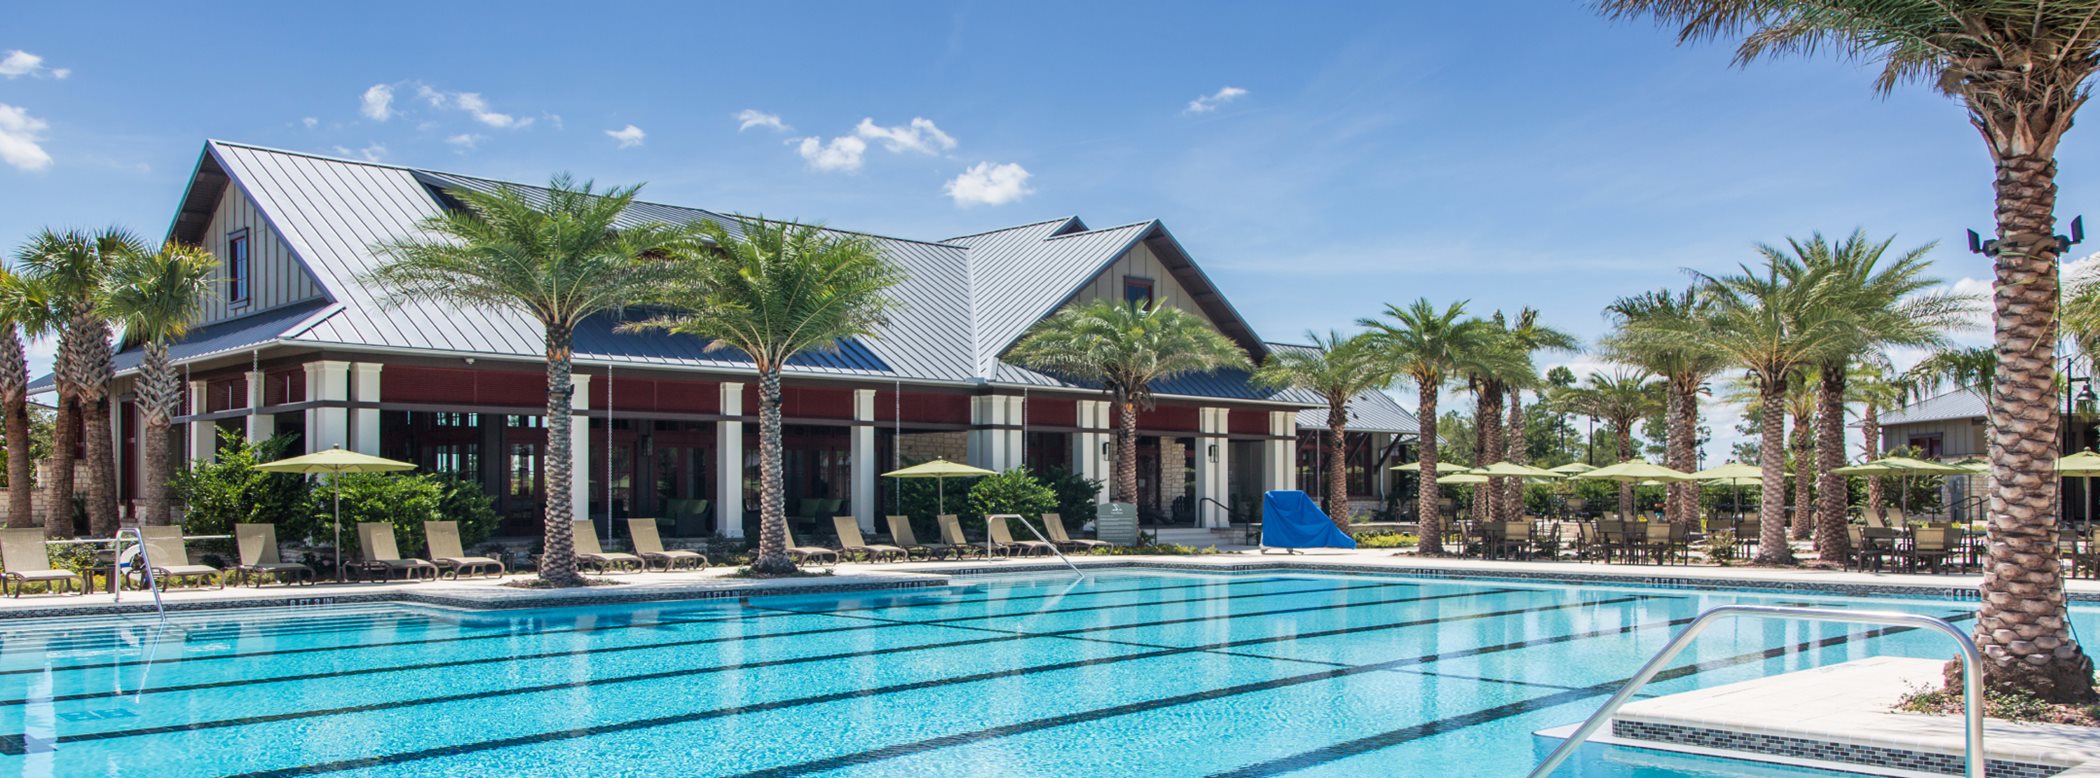 Shearwater 24ft townhomes clubhouse pool